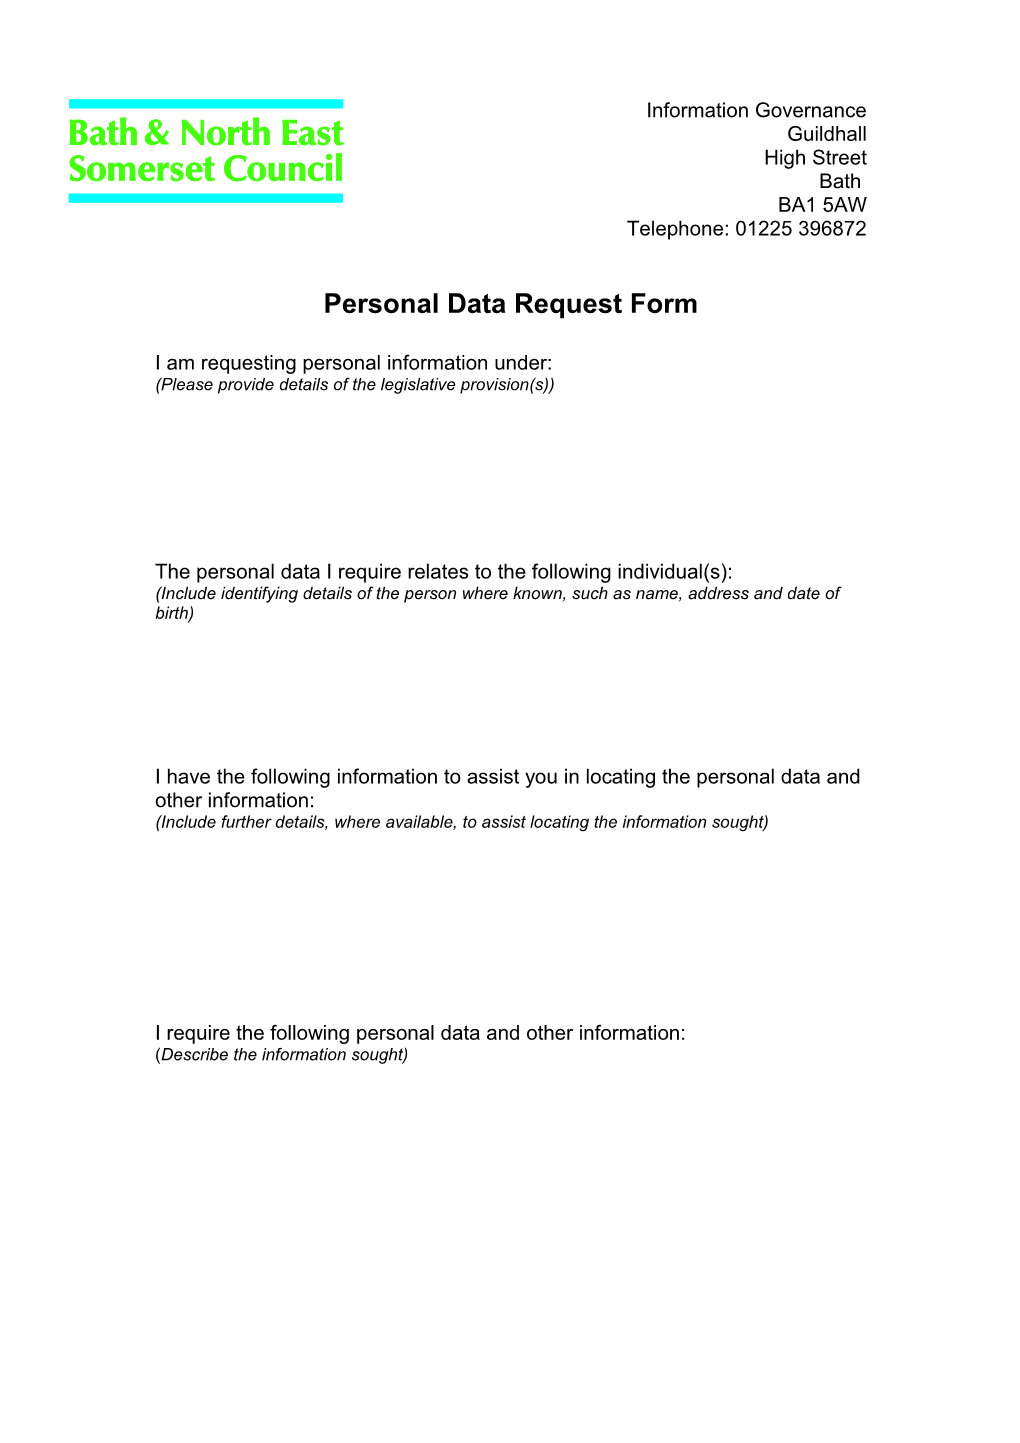 Personal Data Request Form